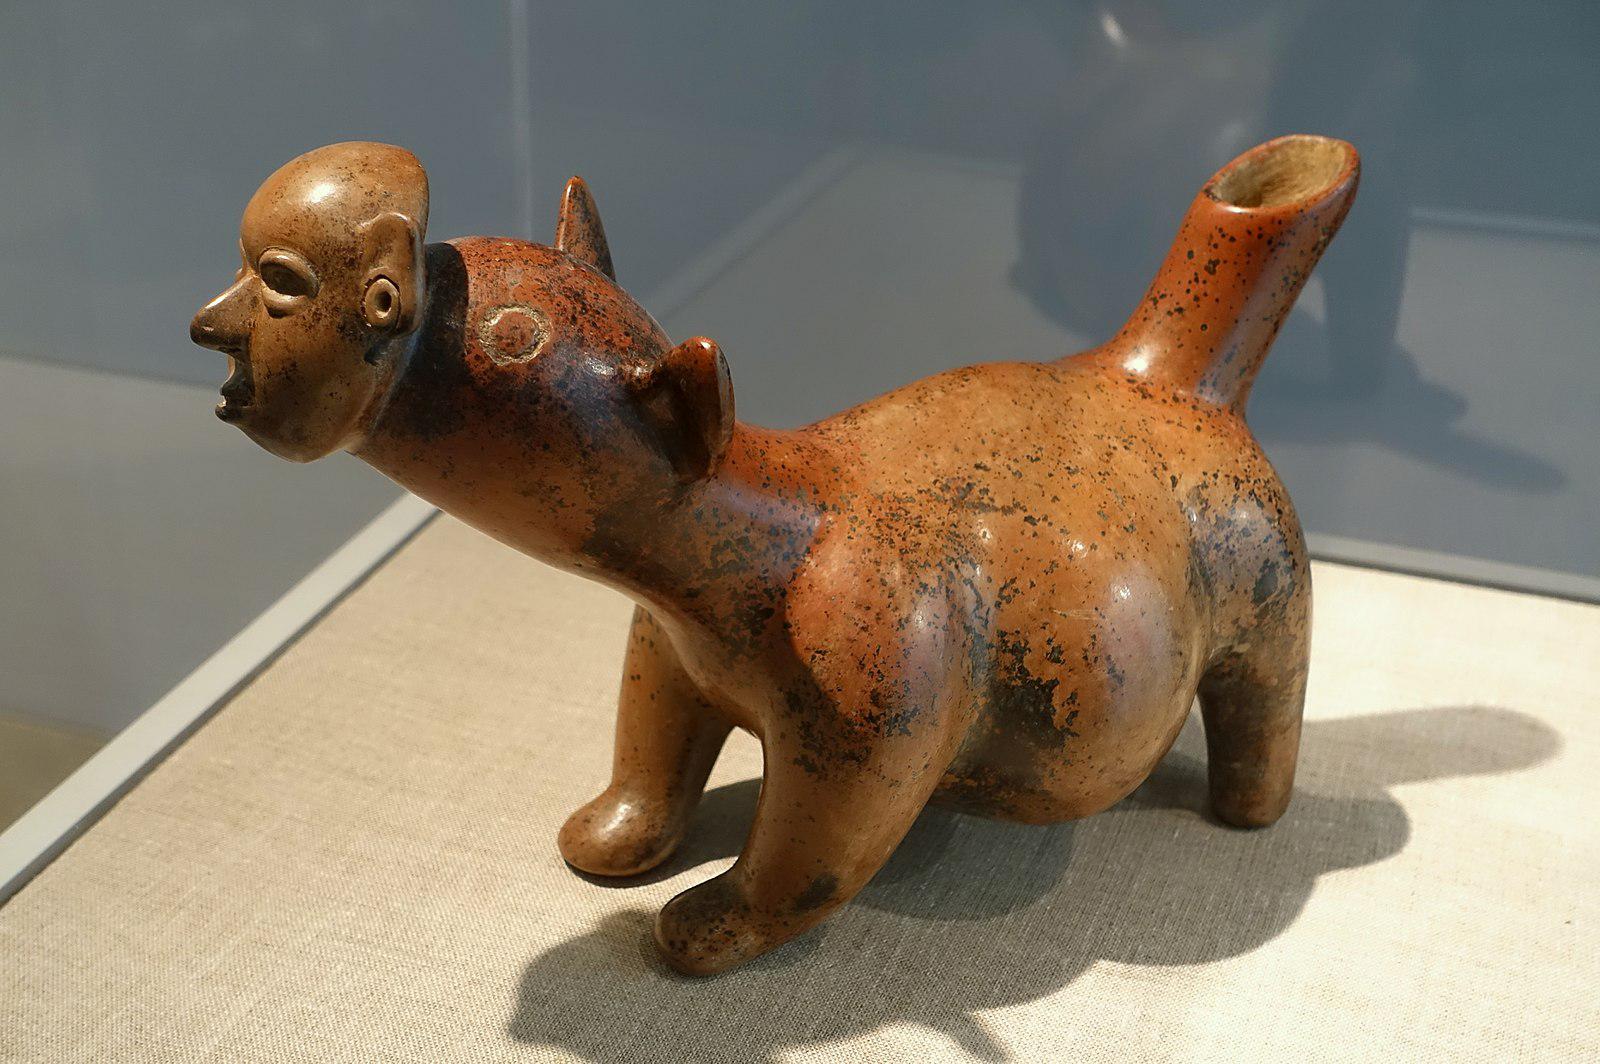 Sculpture of a dog wearing a human mask. Dates back to c.100 BCE-200 CE. Found in the state of Colima, Mexico.jpg